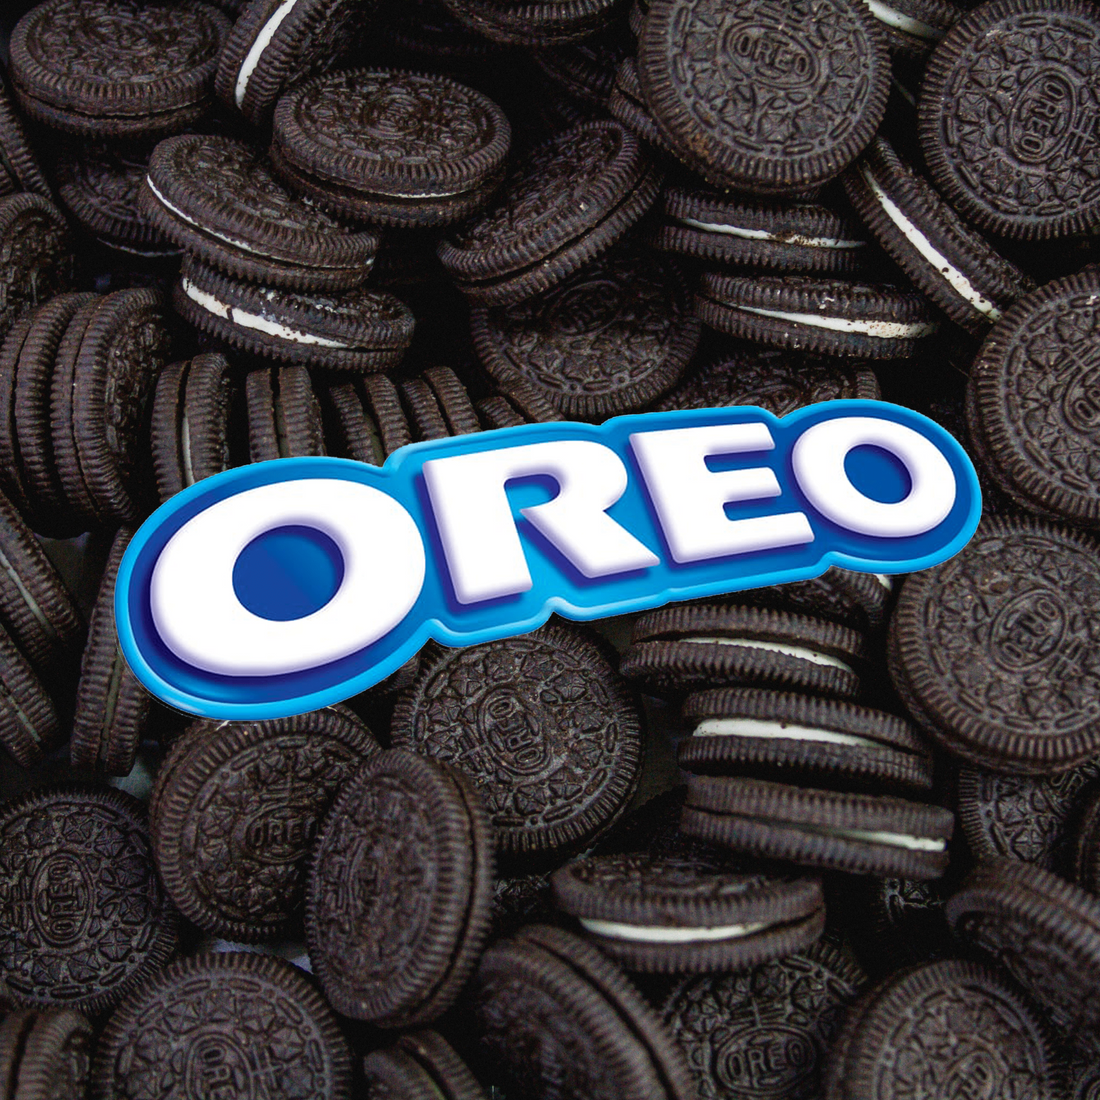 Get The Best Deals On Discount Oreos HERE At BargainBoxed.com